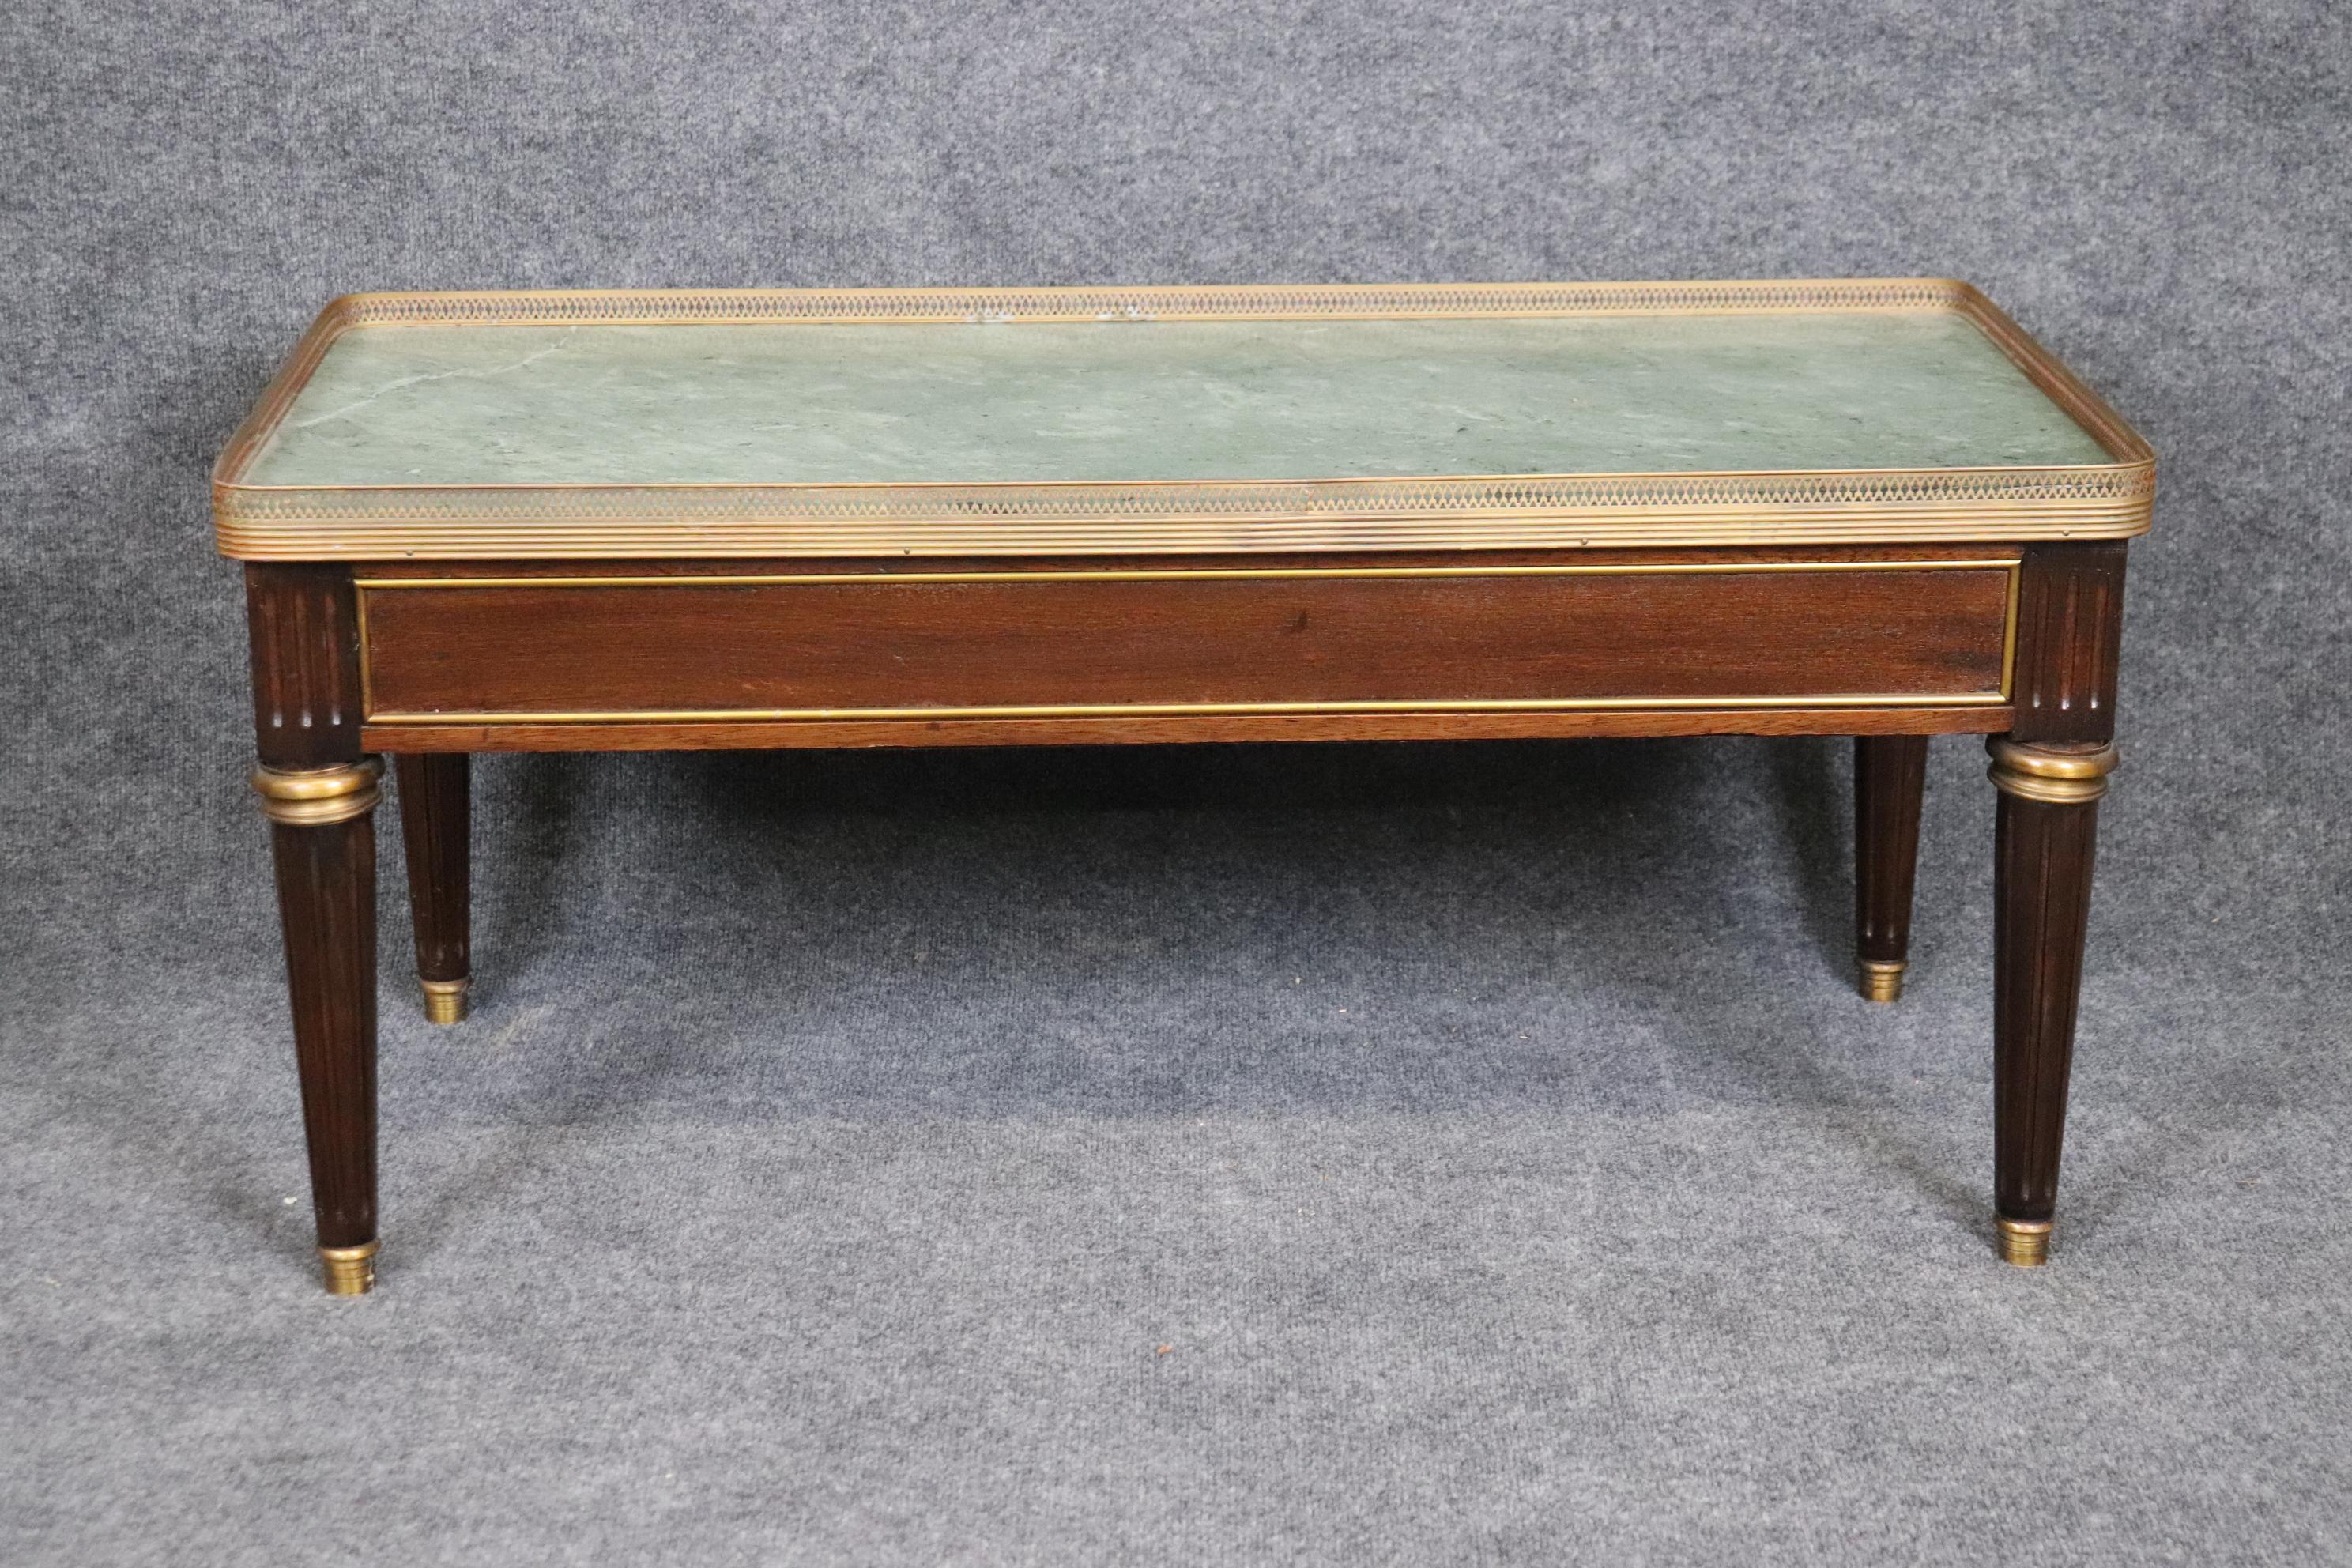 Dimensions: Height: 18 1/4 in Width: 39 3/4 in Depth: 20 in 


This vintage Louis XVI style marble top coffee table, attributed to Maison Jansen, coffee table is of the highest quality! Maison Jansen made some of the world's most chic furniture and